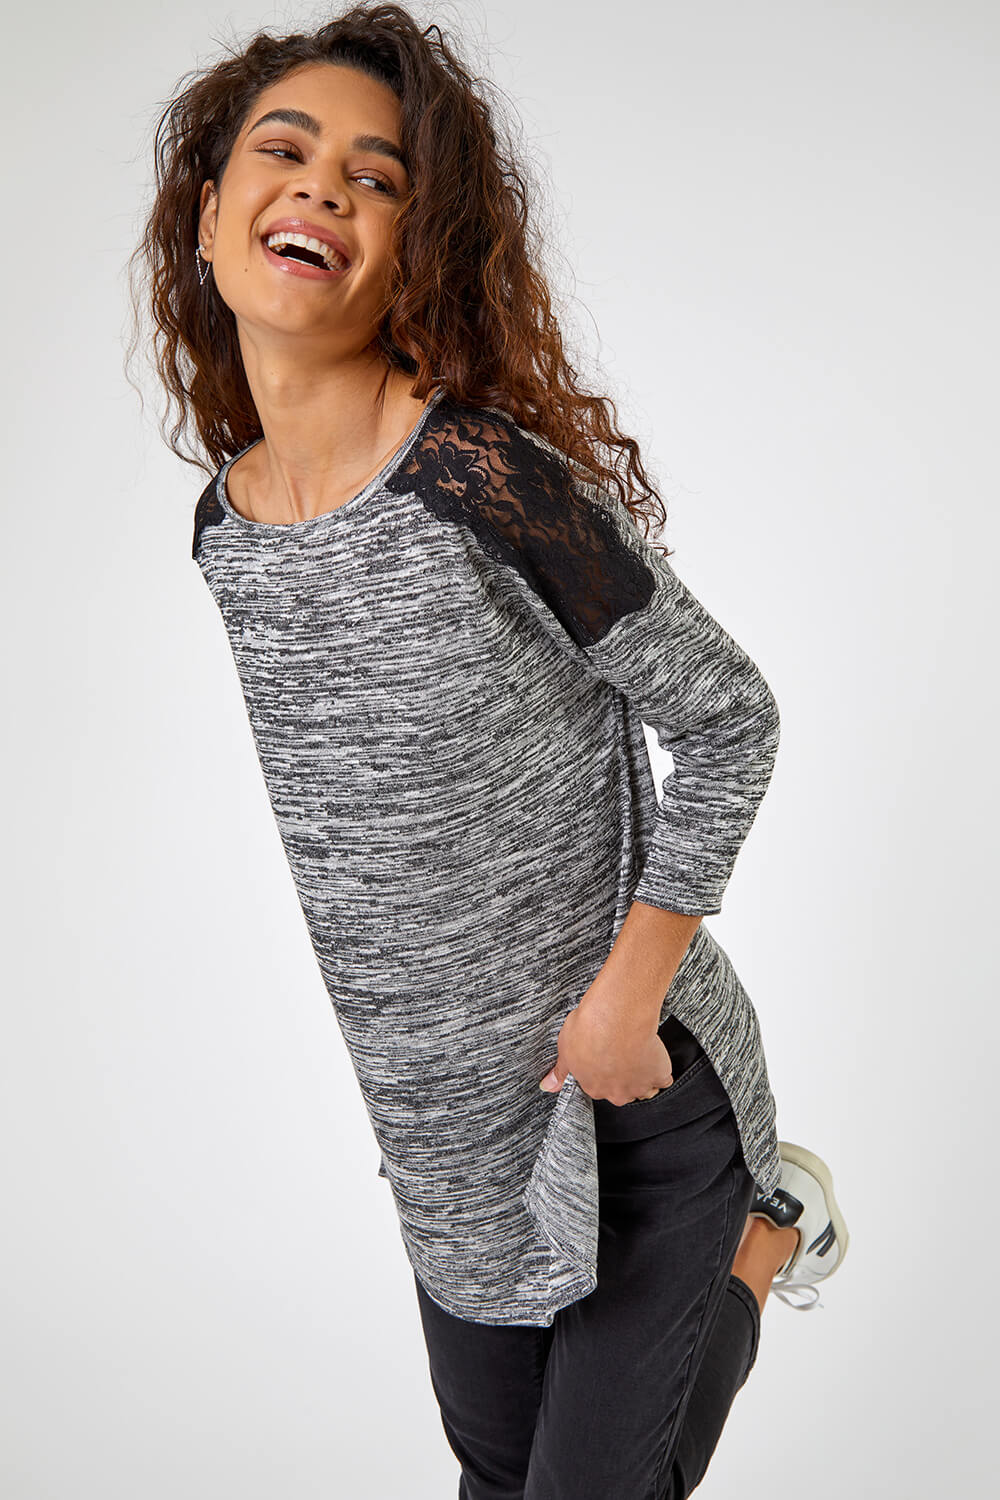 Grey Lace Shoulder Tunic Top, Image 4 of 5